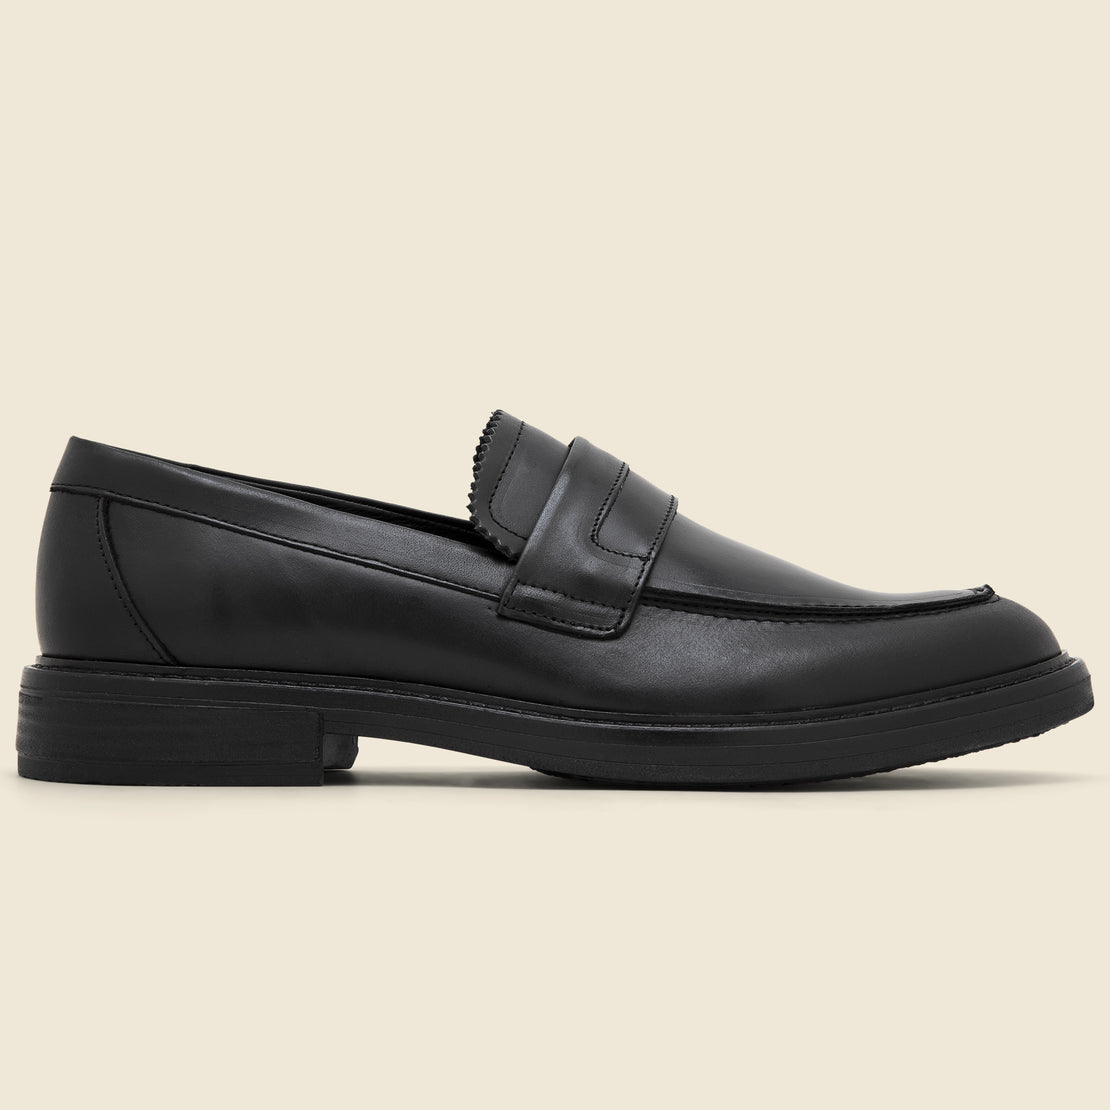 Shoe the Bear Stanley Leather Loafer - Black